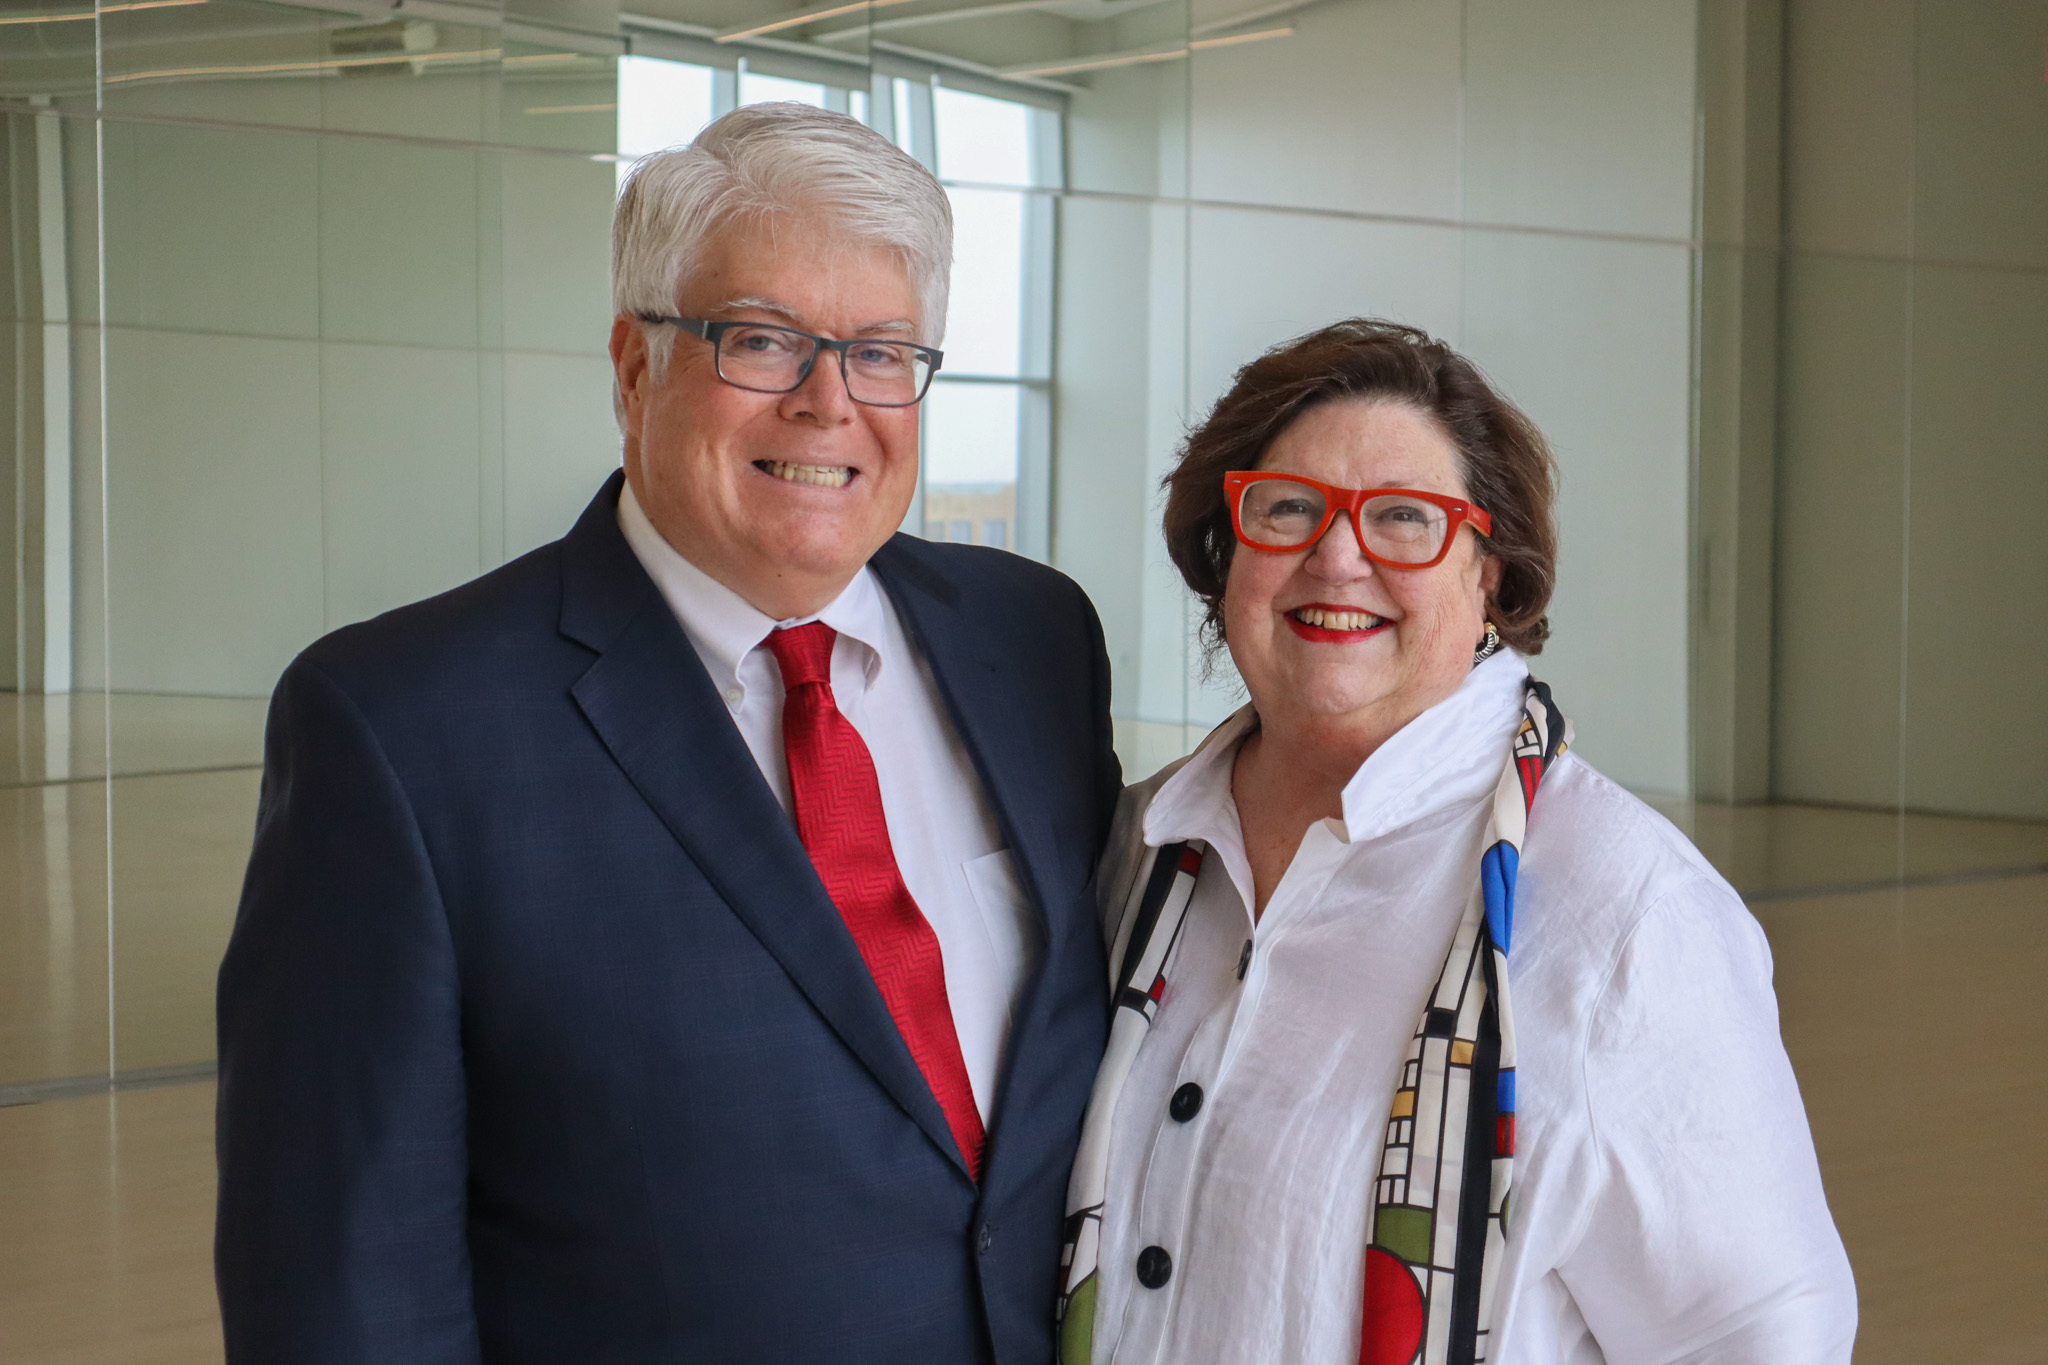 Two older white people stand in a room with walls of mirrors. They are smiling at the camera. The man on the left is wearing a blue suit, black glasses and white tie. The woman on the right is wearing a white shirt, colorful scarf and red glasses.